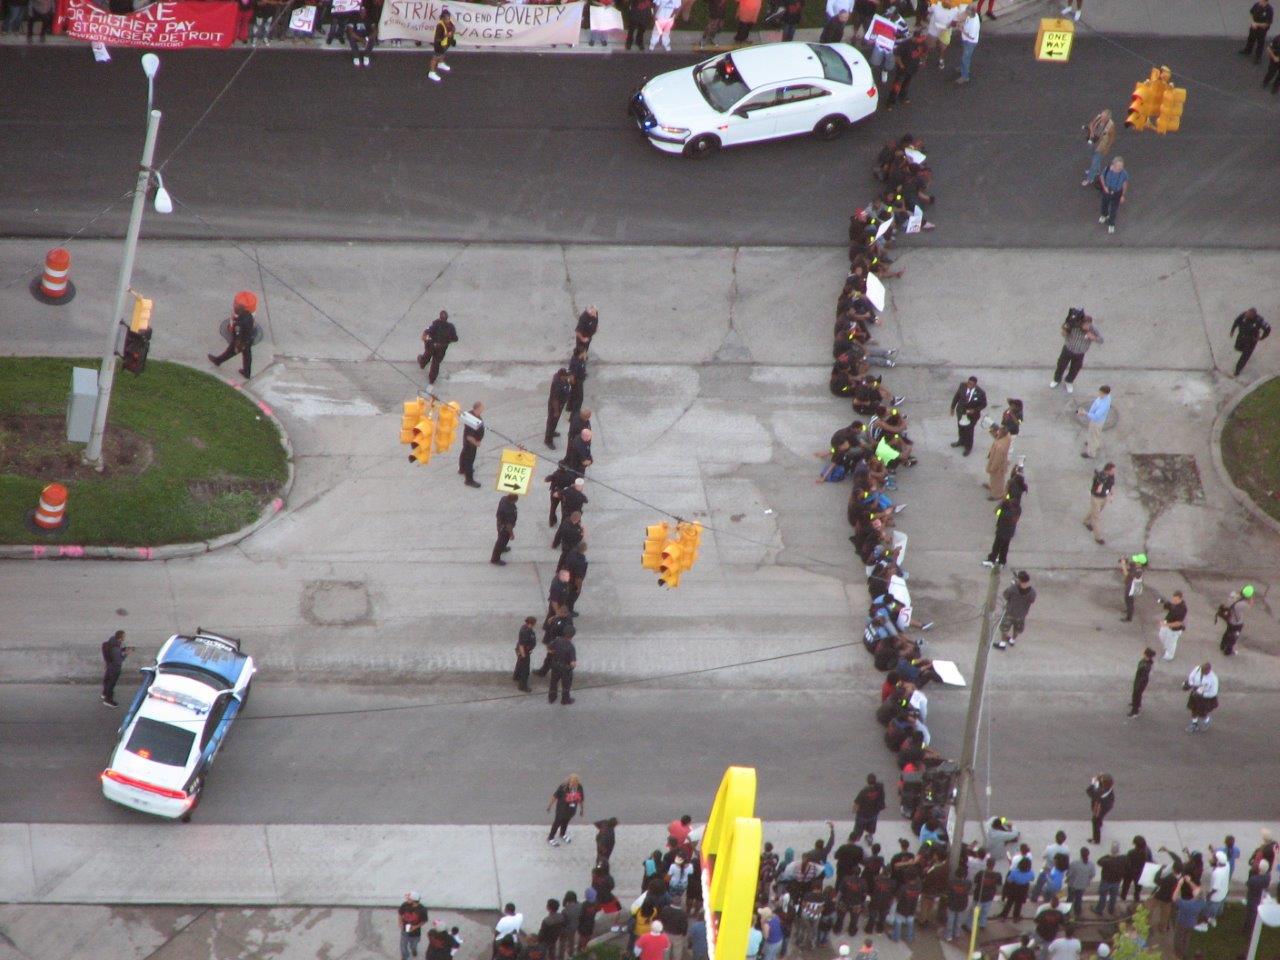 Dozens of people were arrested during a minimum wage protest outside a Detroit McDonald's. (Credit: Bill Szumanski/WWJ Newsradio 950)